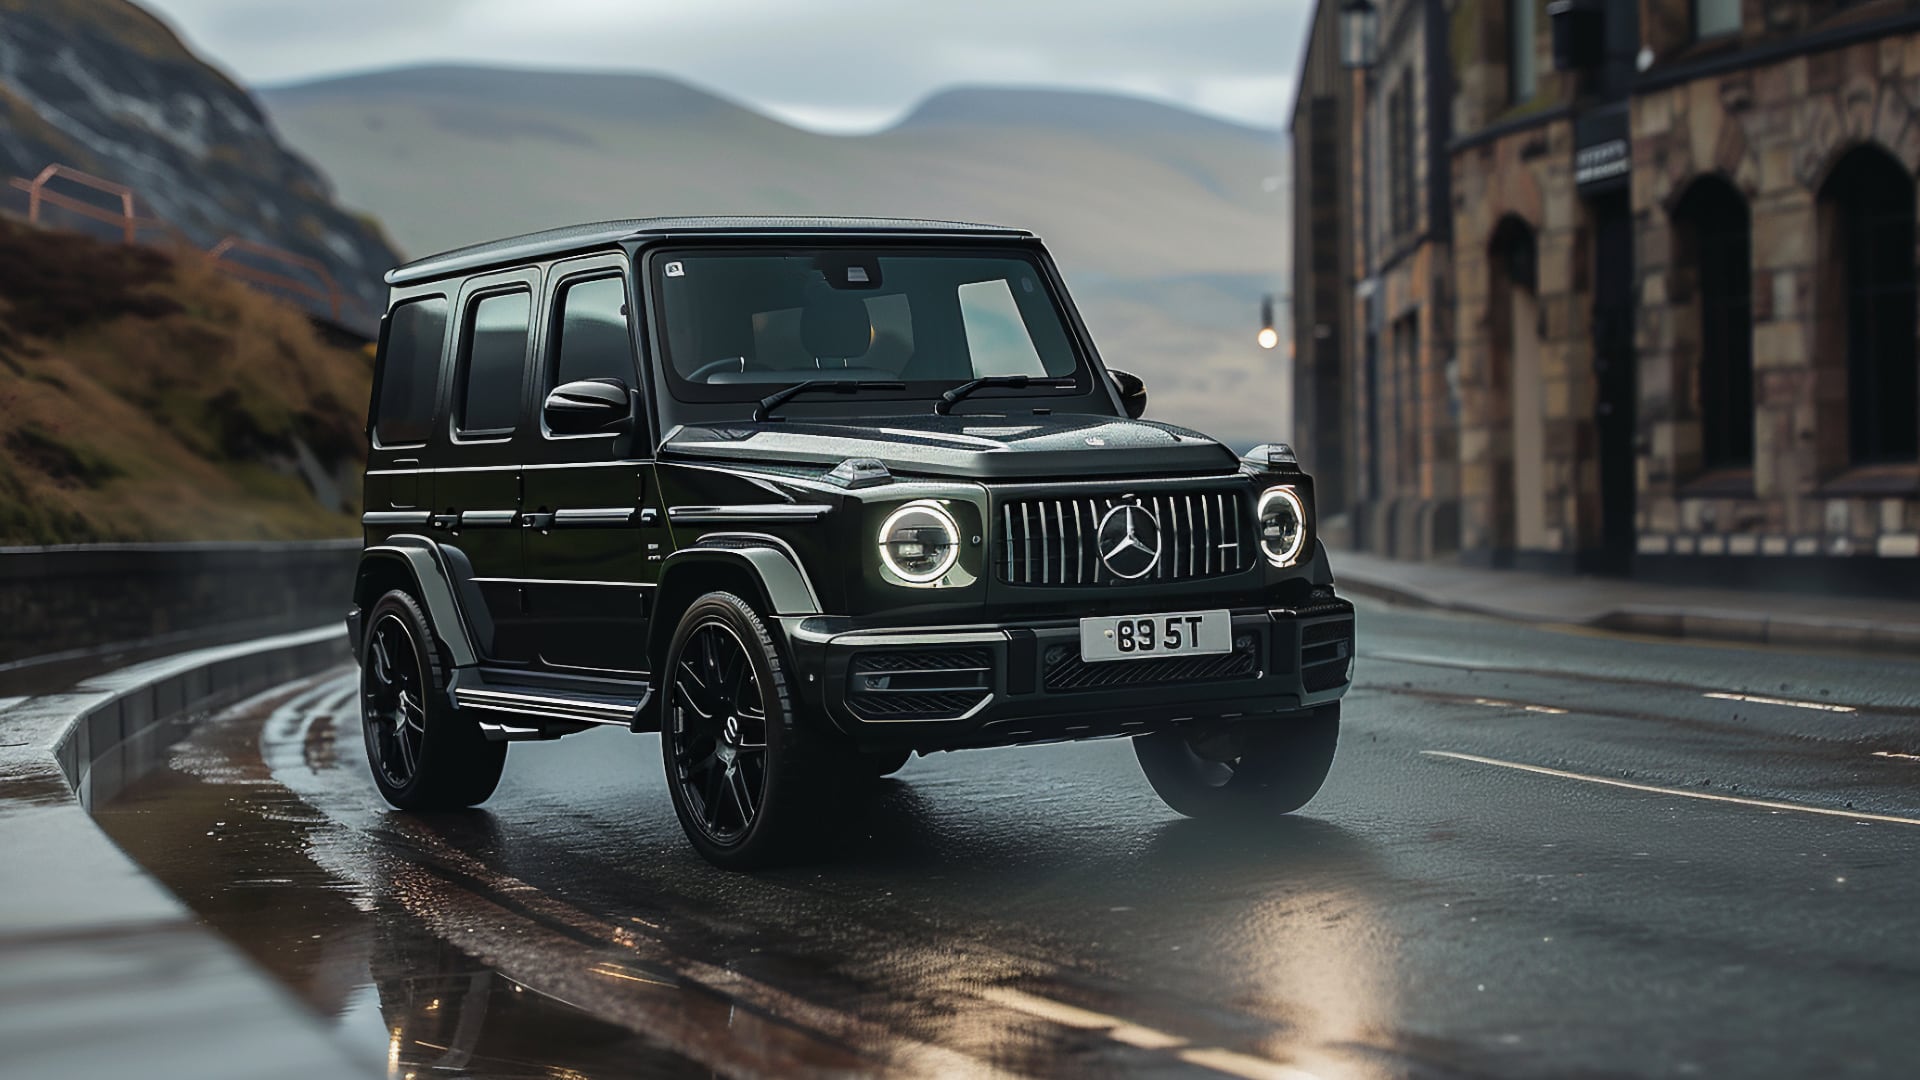 The Mercedes G Wagon is driving down a wet road.